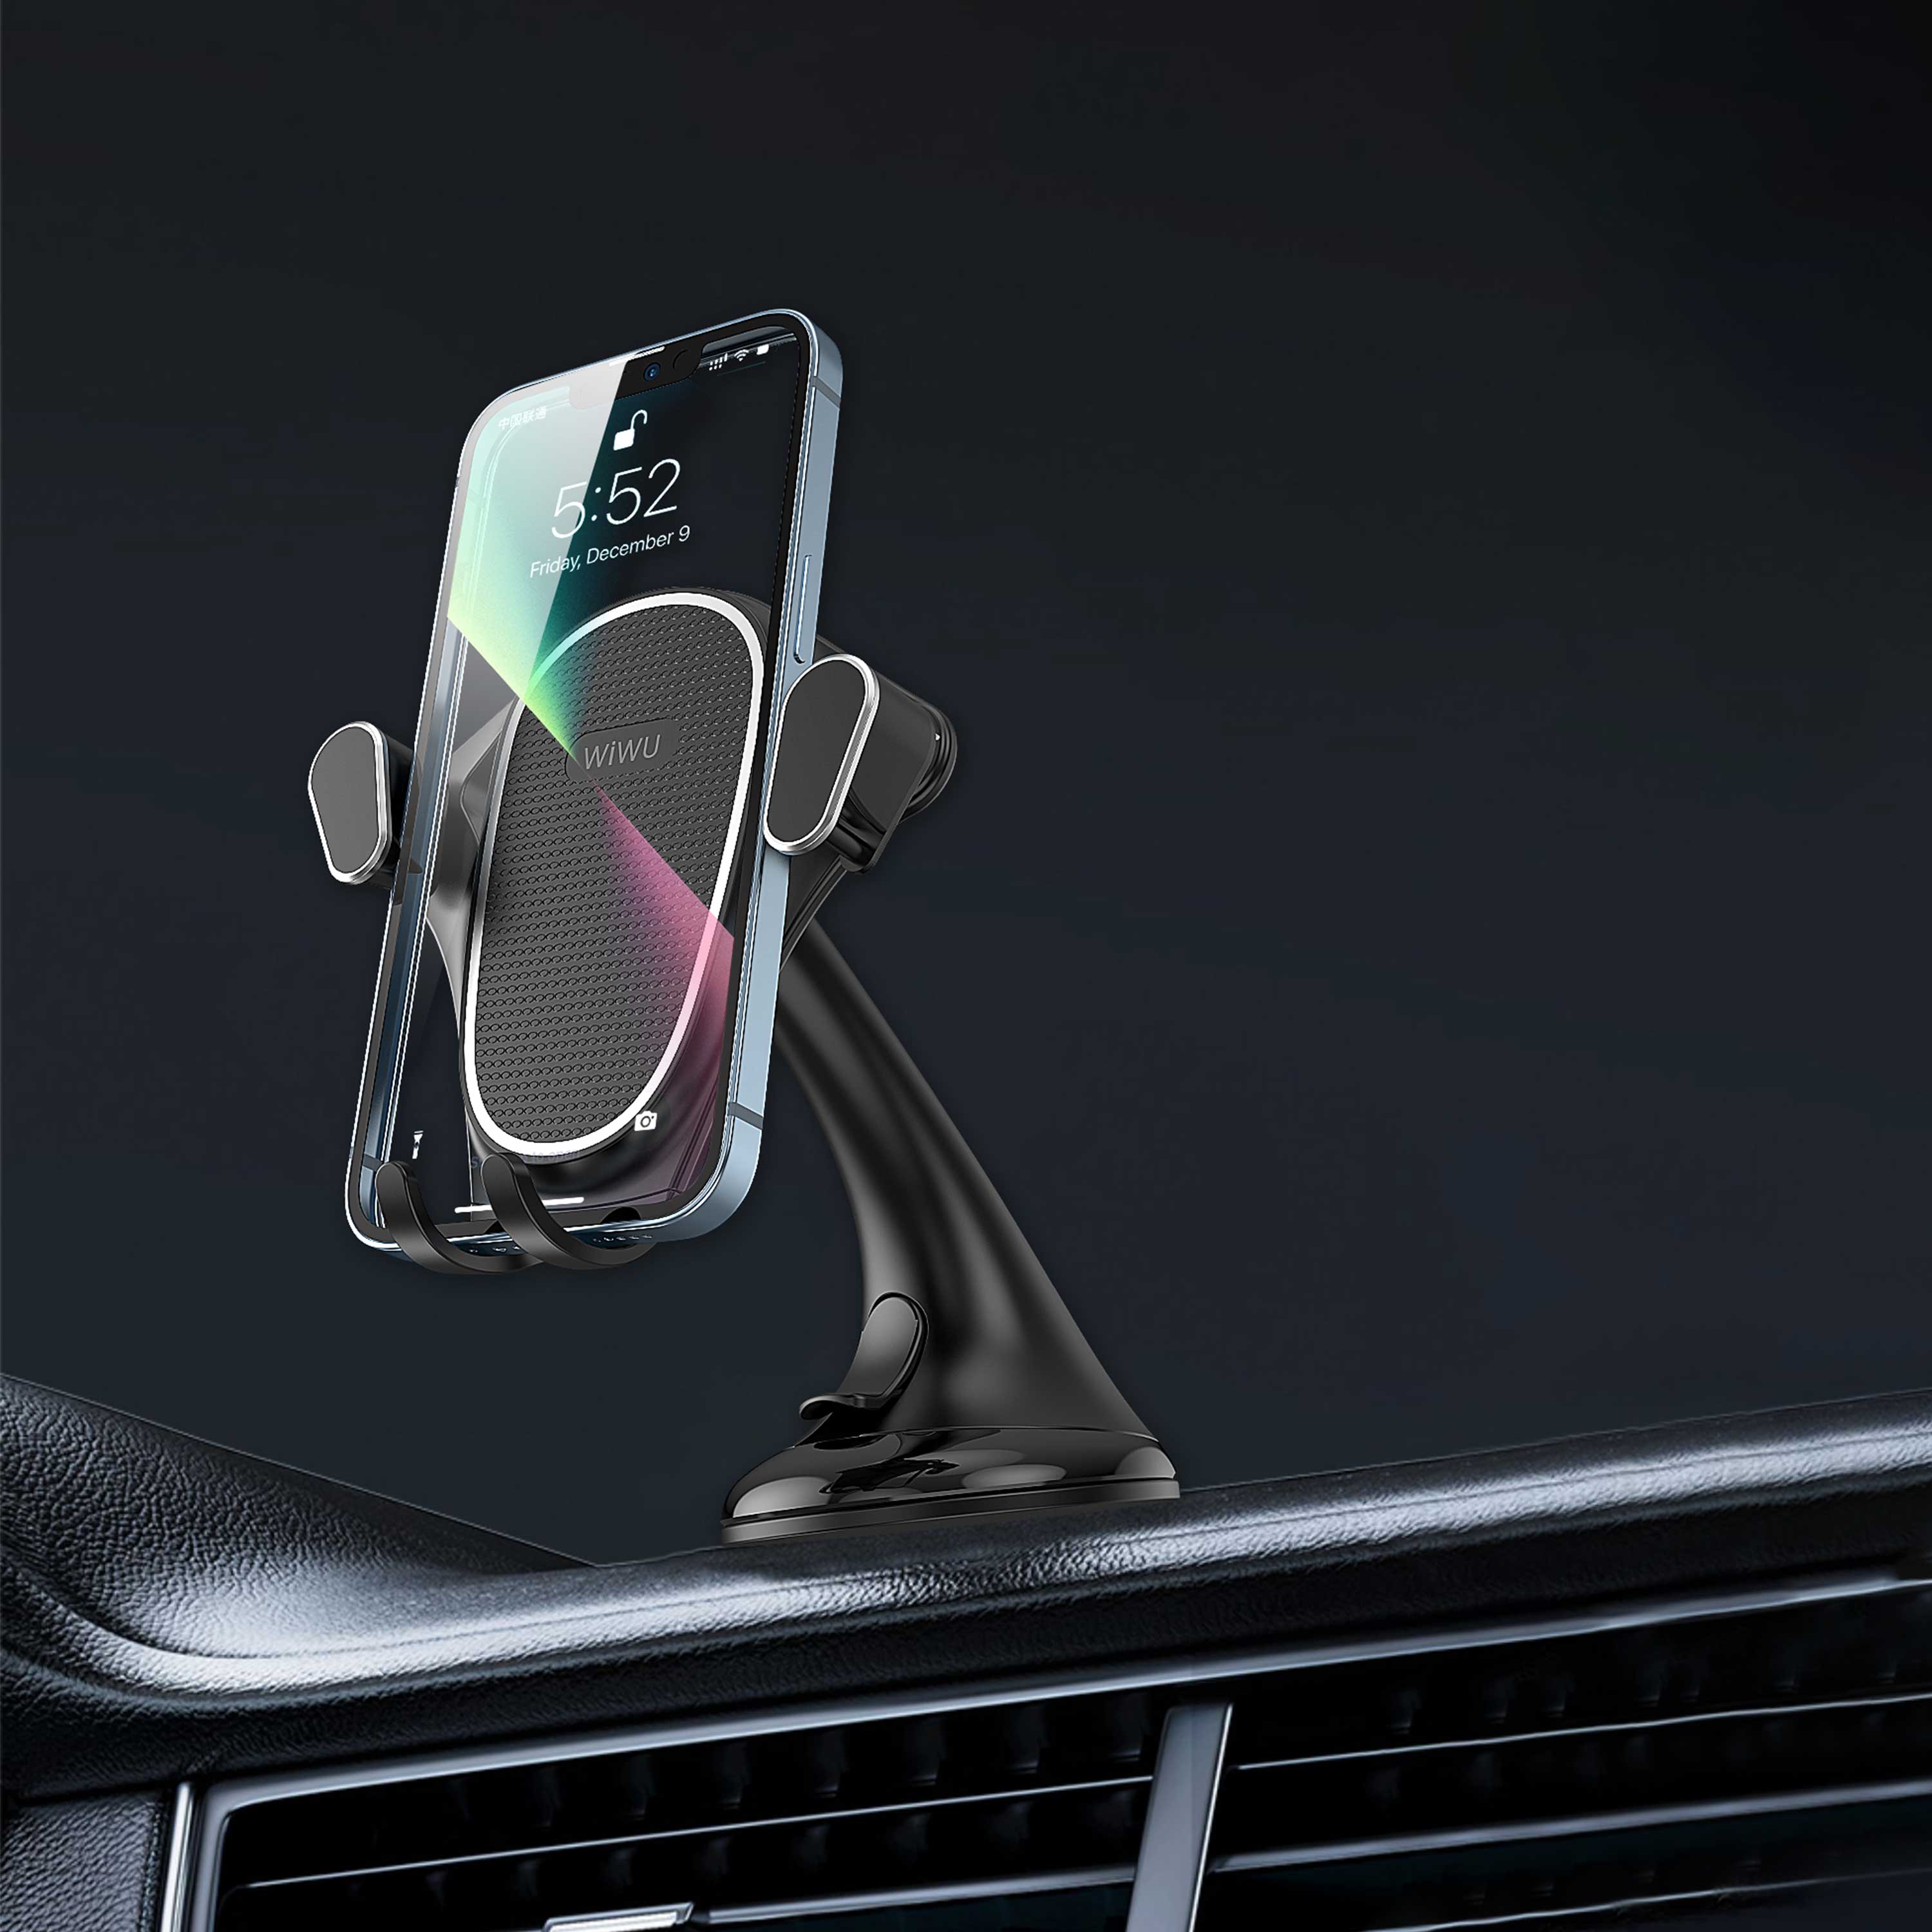 Buy Wiwu CH019 Suction Cup Design Car Phone Holder Working With Phone Weight in Jordan - Phonatech